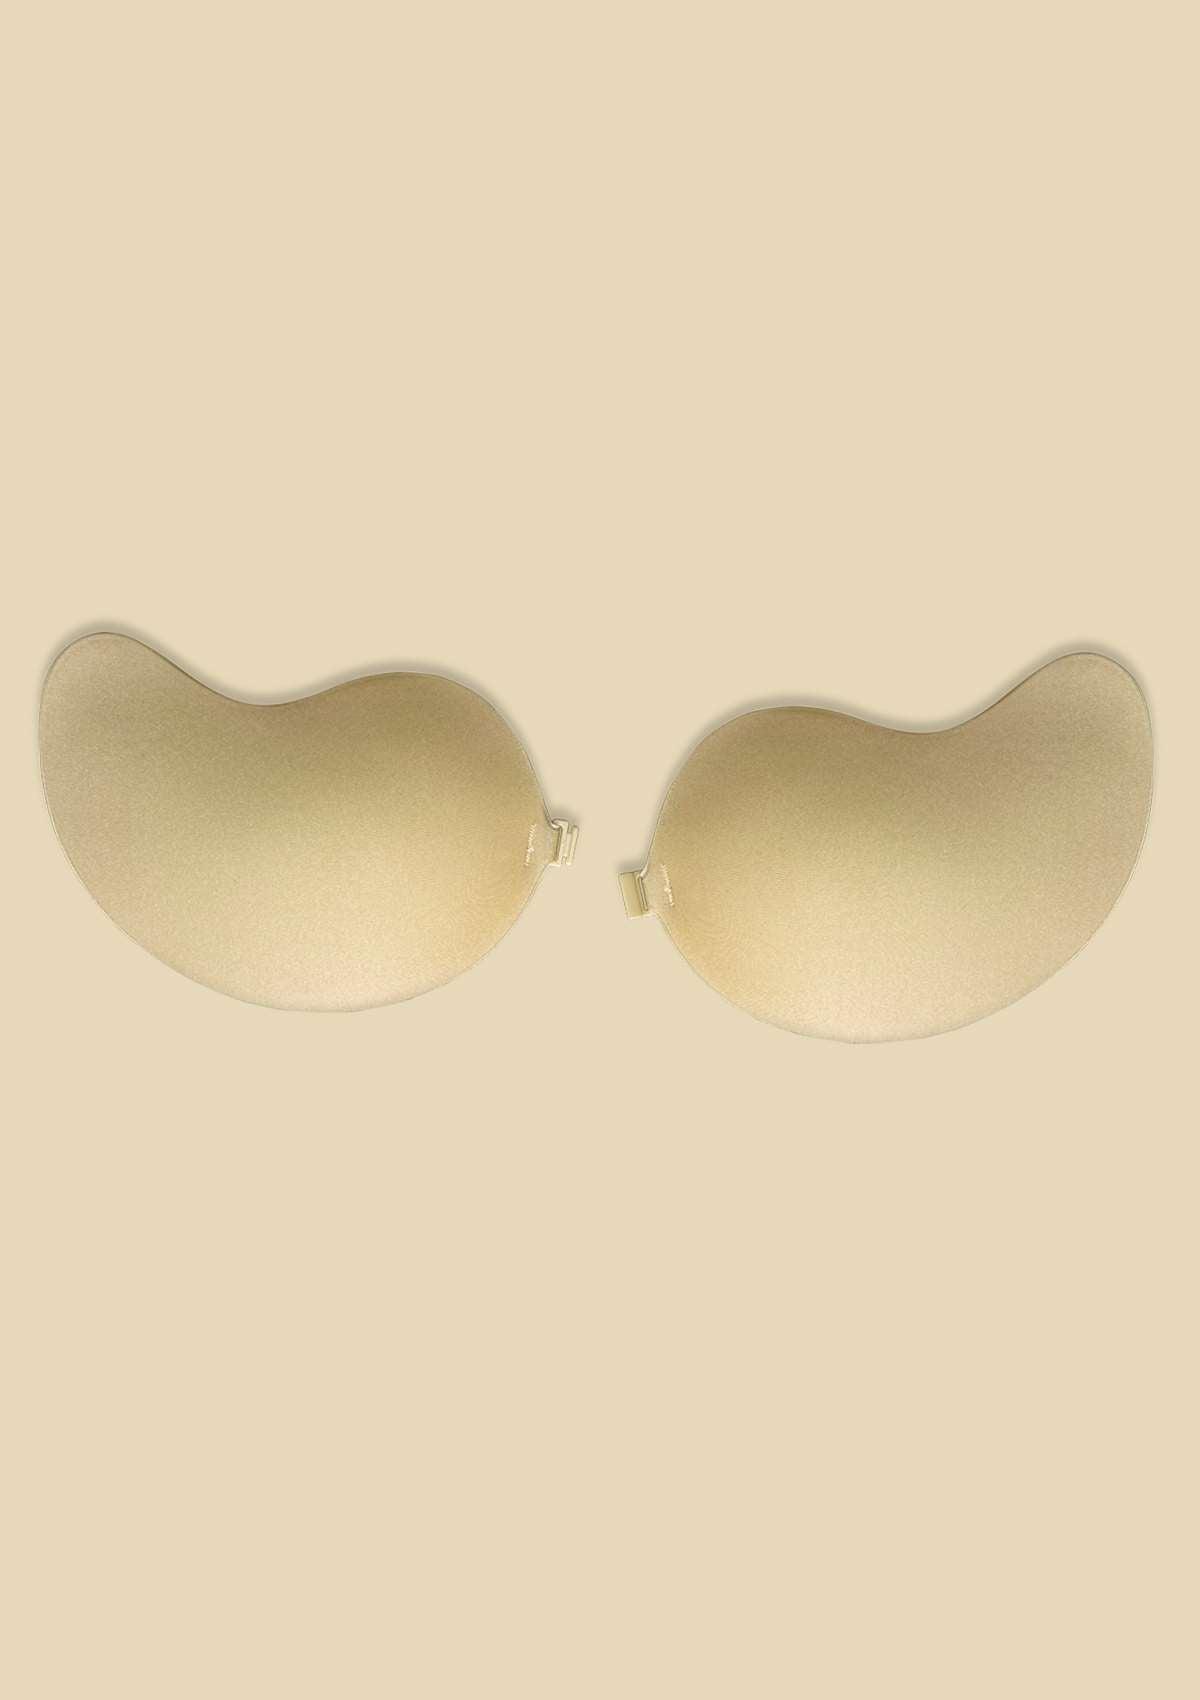 HSIA Strapless Backless Adhesive Sticky Bra  - 34D / Beige